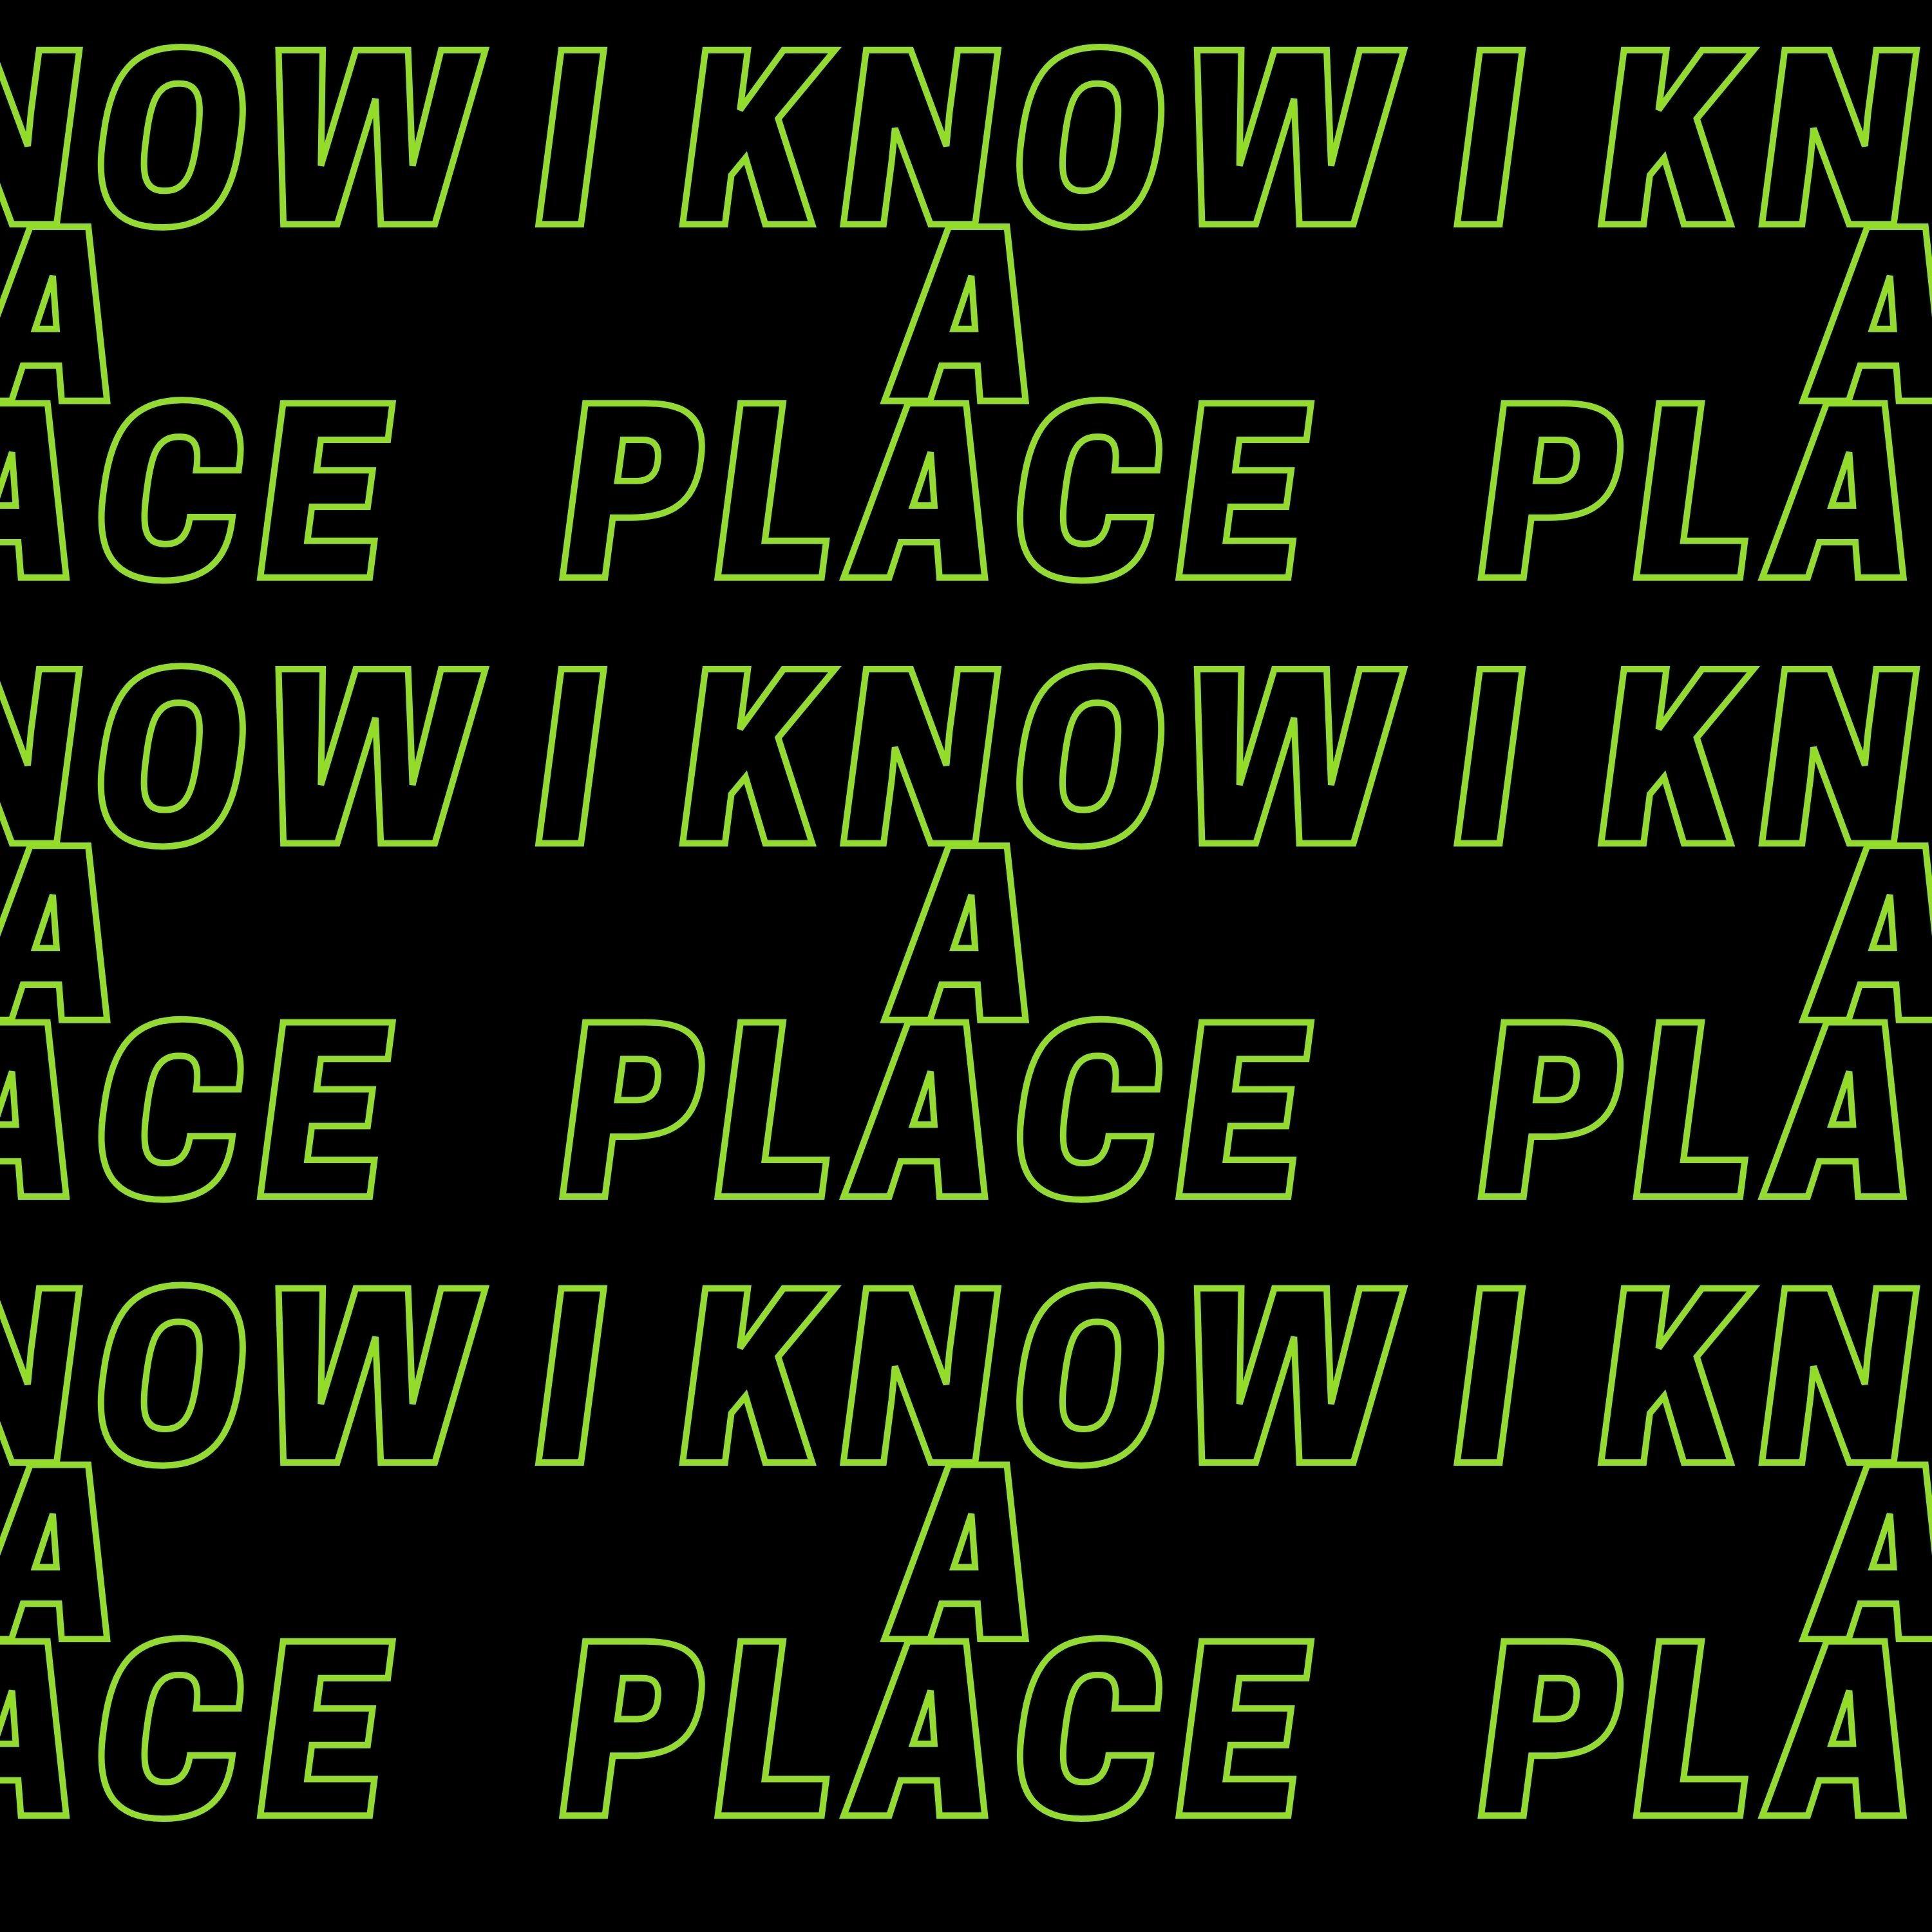 I Know a Place歌词 歌手Chevy-专辑I Know a Place-单曲《I Know a Place》LRC歌词下载